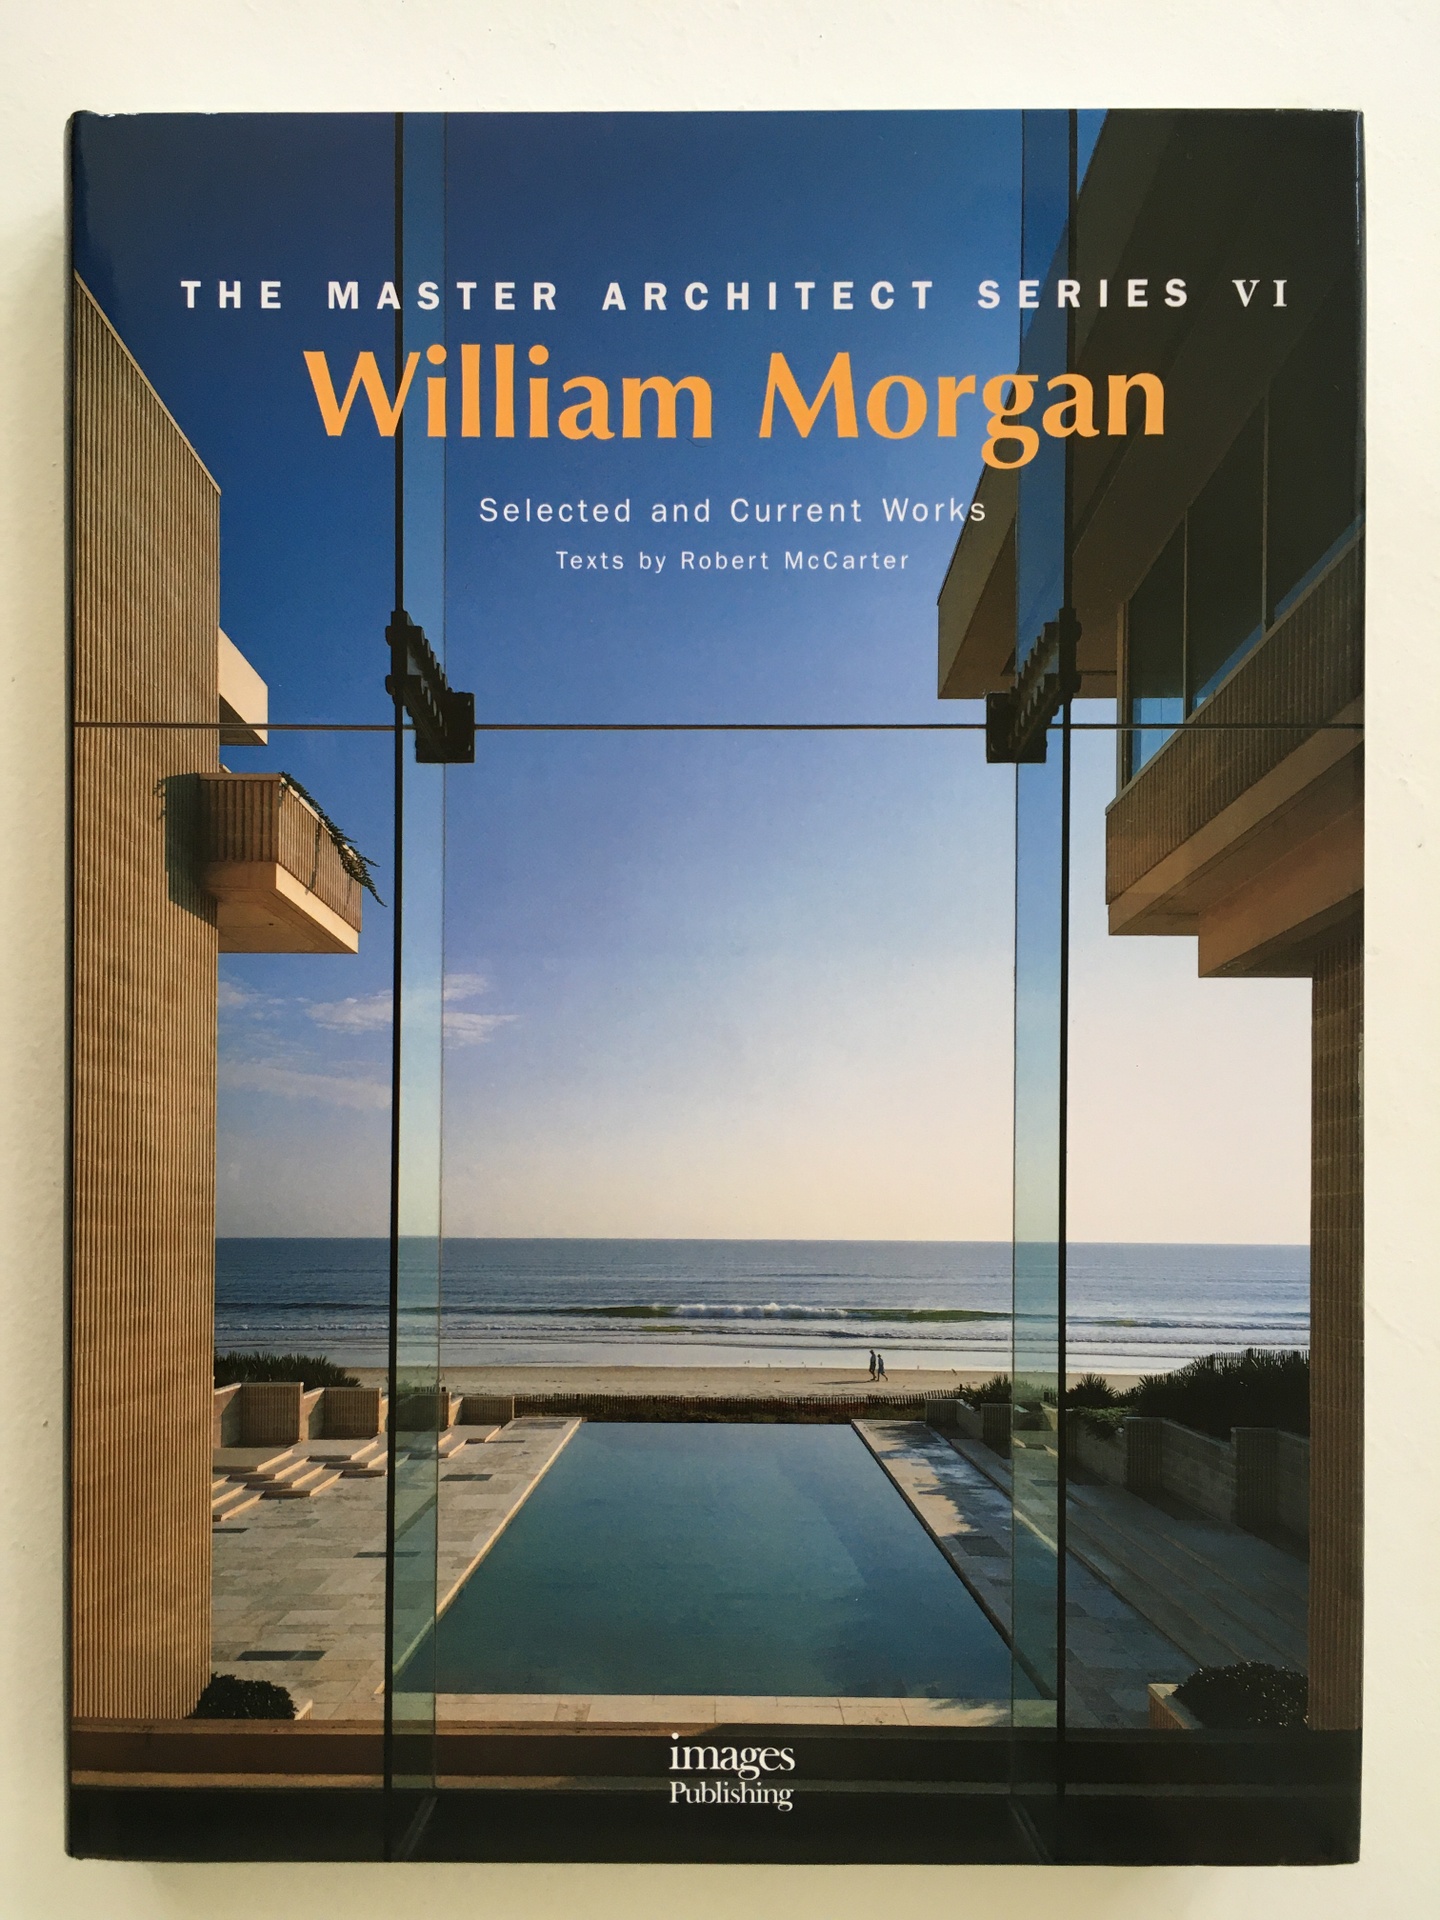 Cover of William Morgan, featuring a photo looking out of a building past an infinity pool to the waterfront.